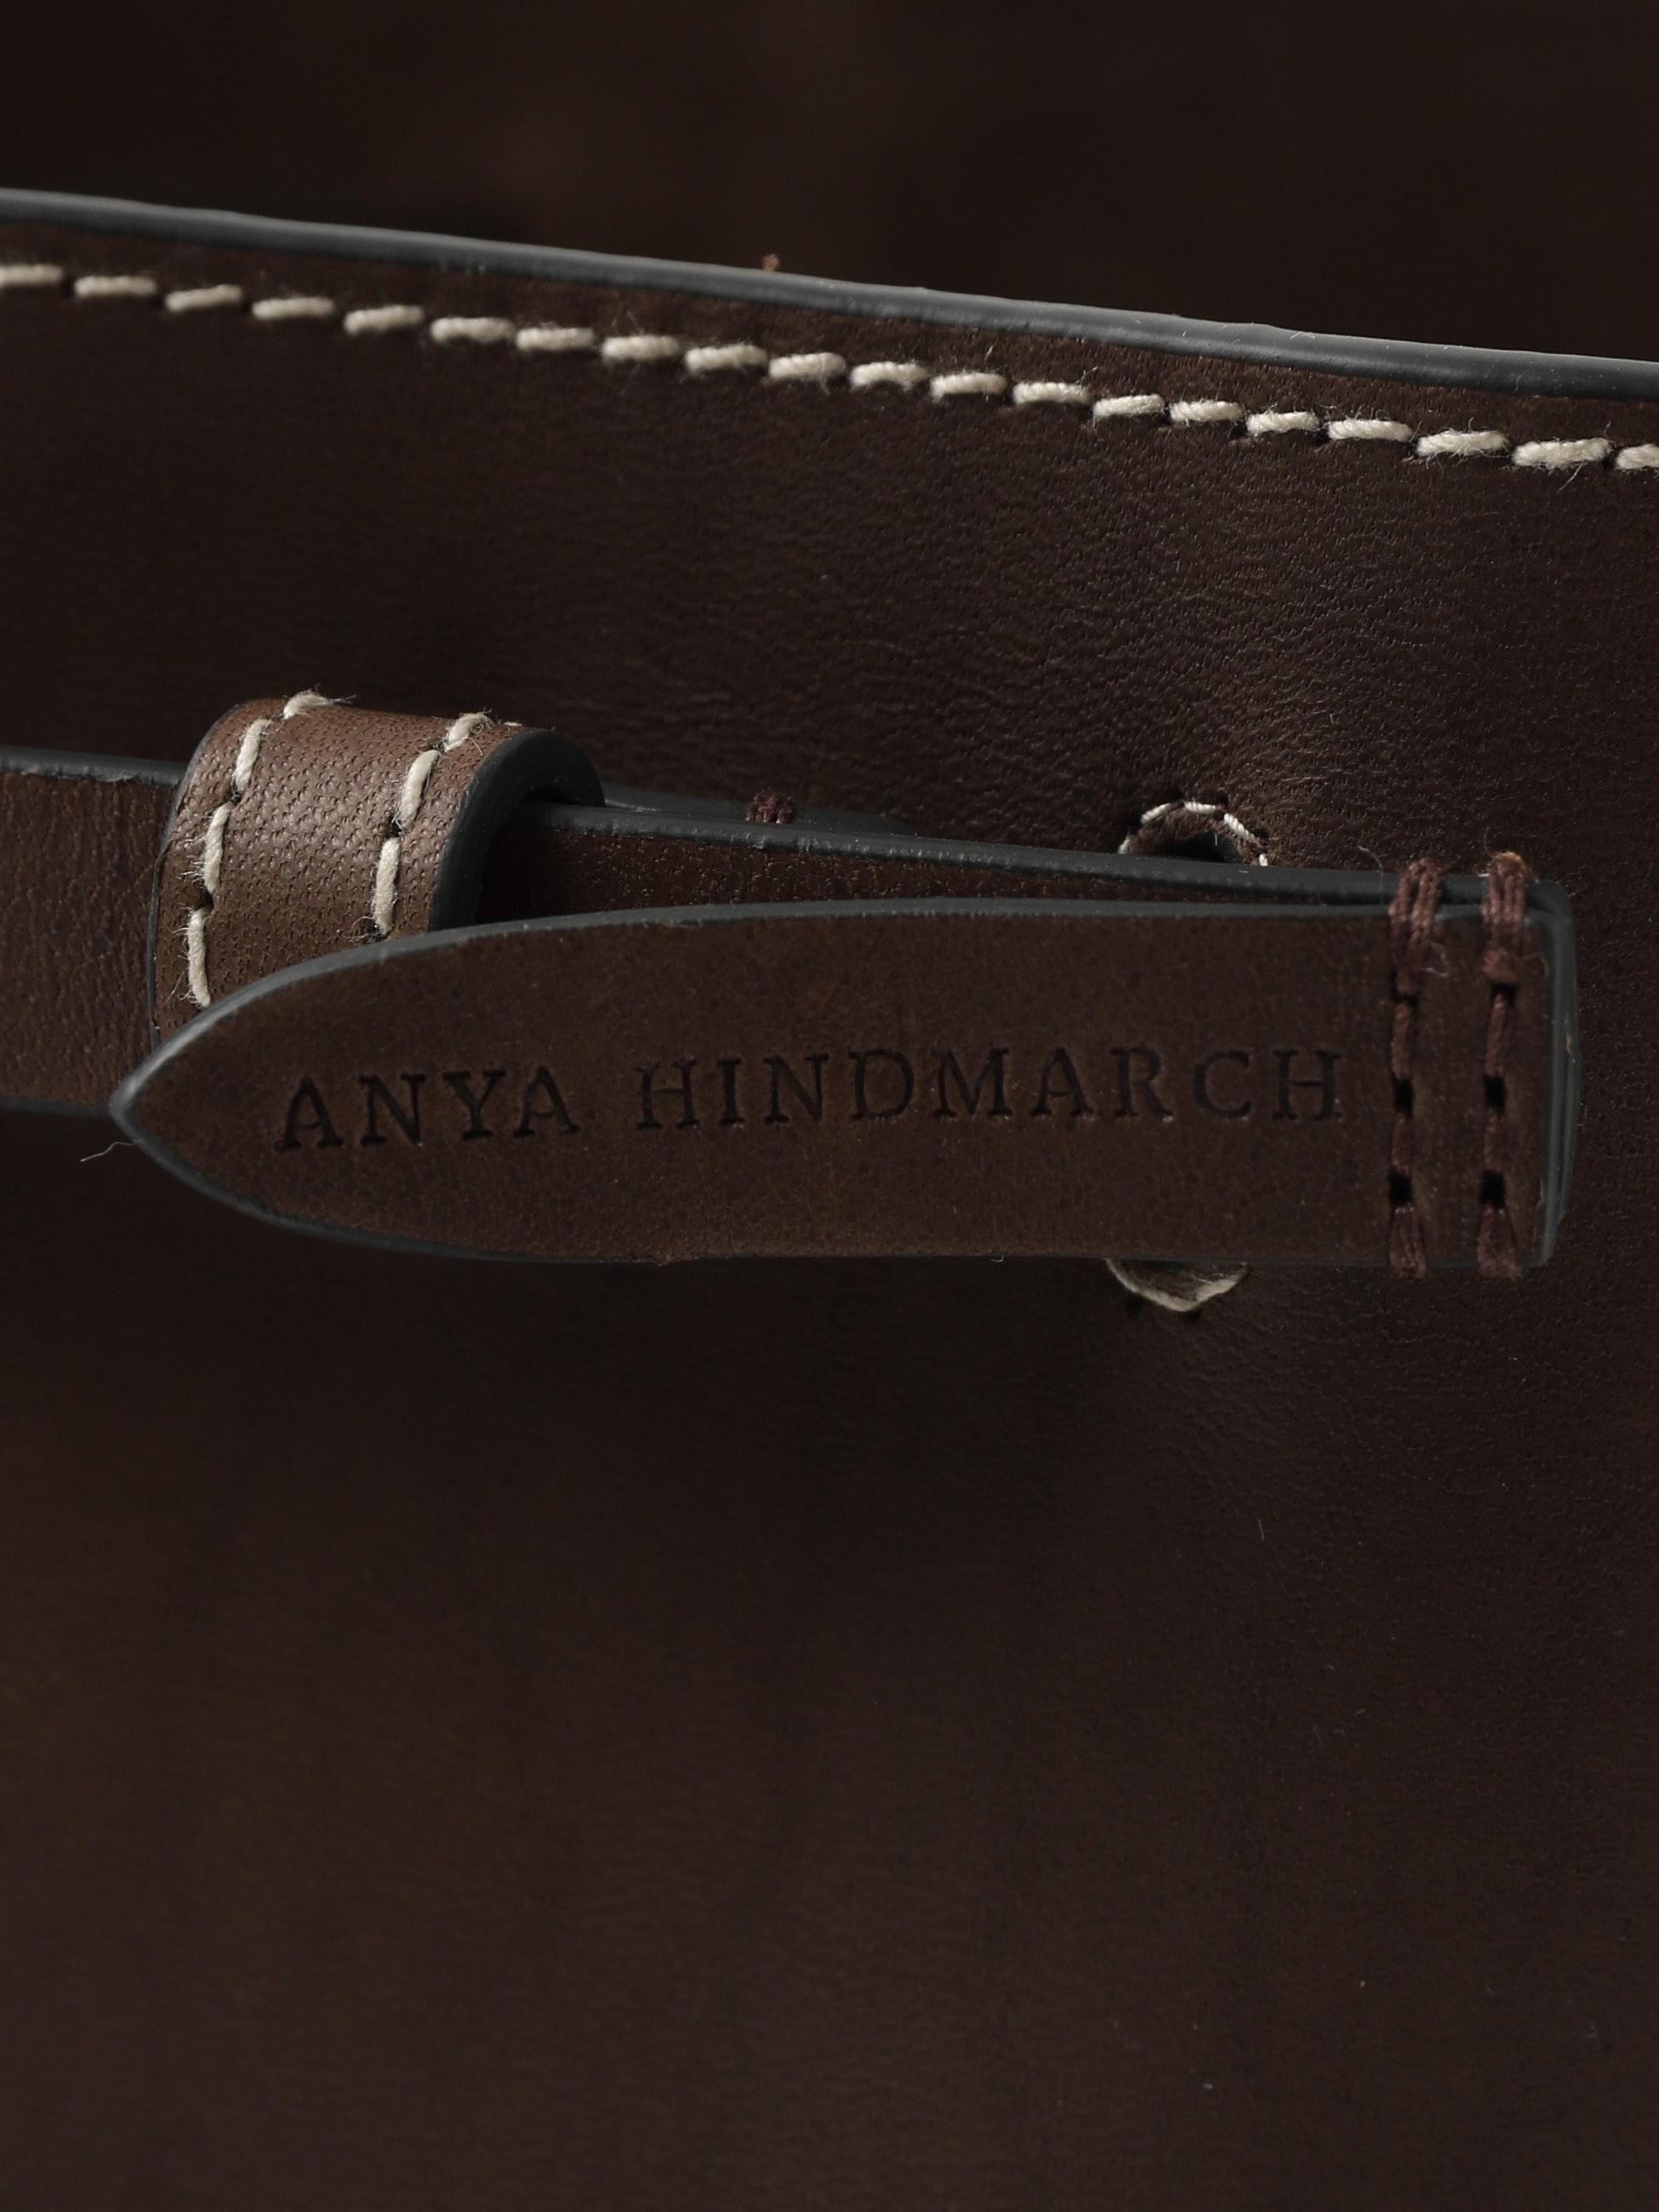 Anya Hindmarch Return to Nature Small Leather Bucket Bag